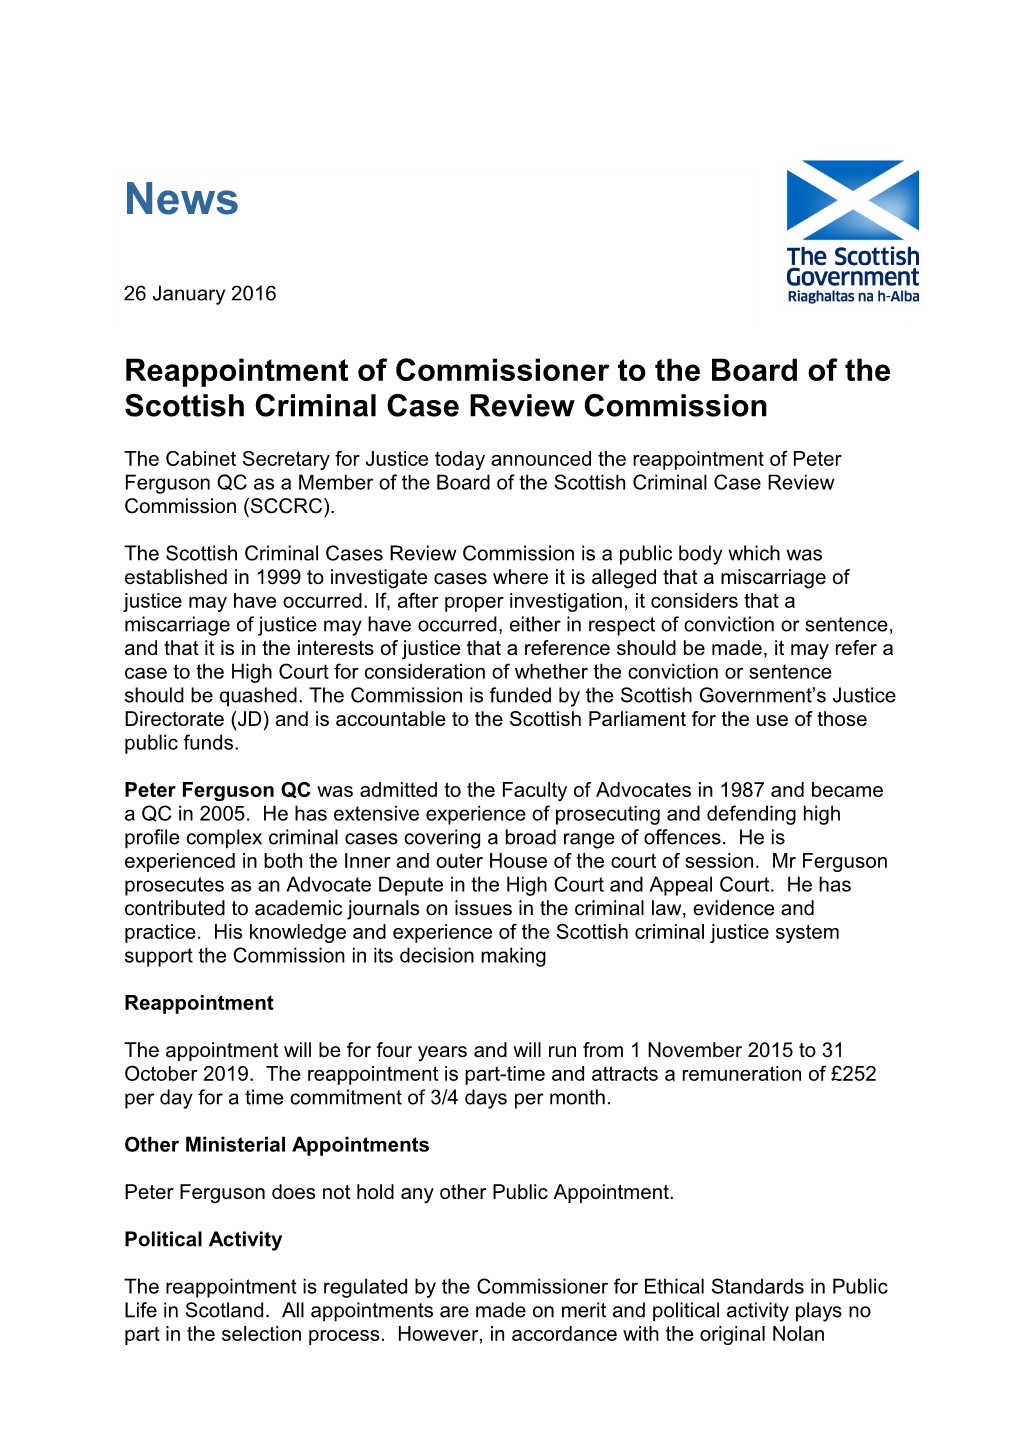 Reappointment of Commissioner to the Board of the Scottish Criminal Case Review Commission